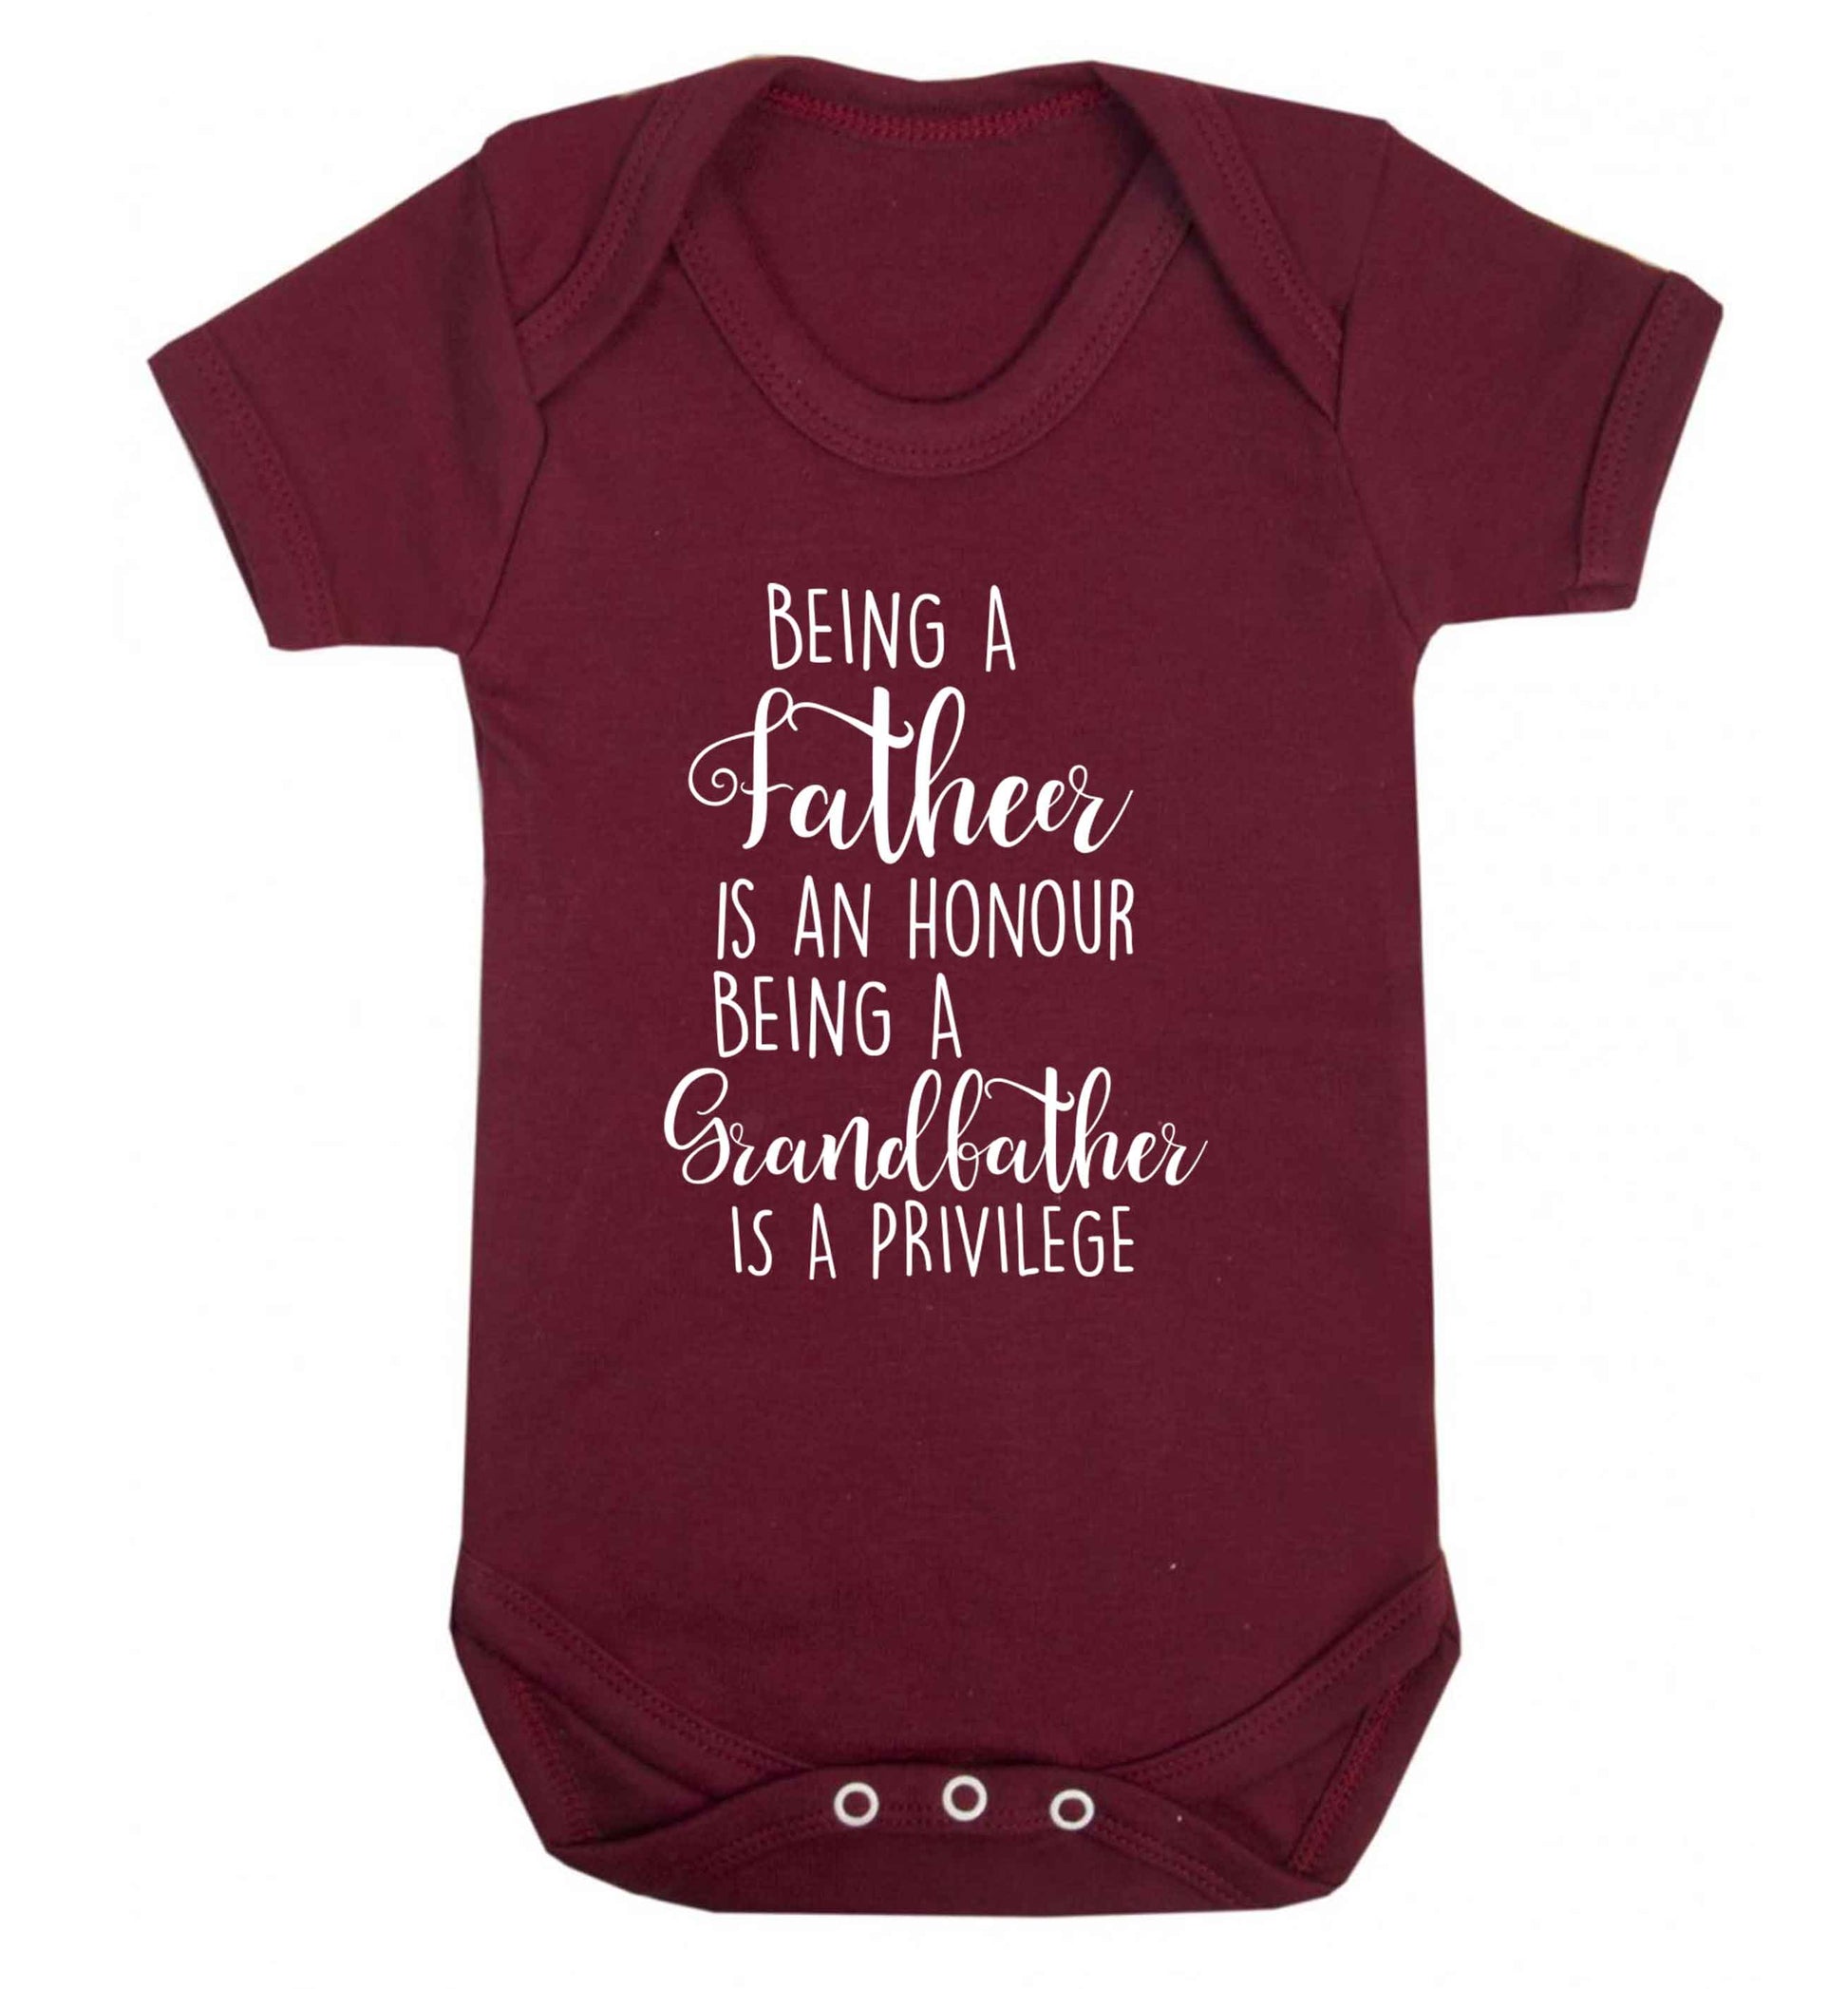 Being a father is an honour being a grandfather is a privilege Baby Vest maroon 18-24 months